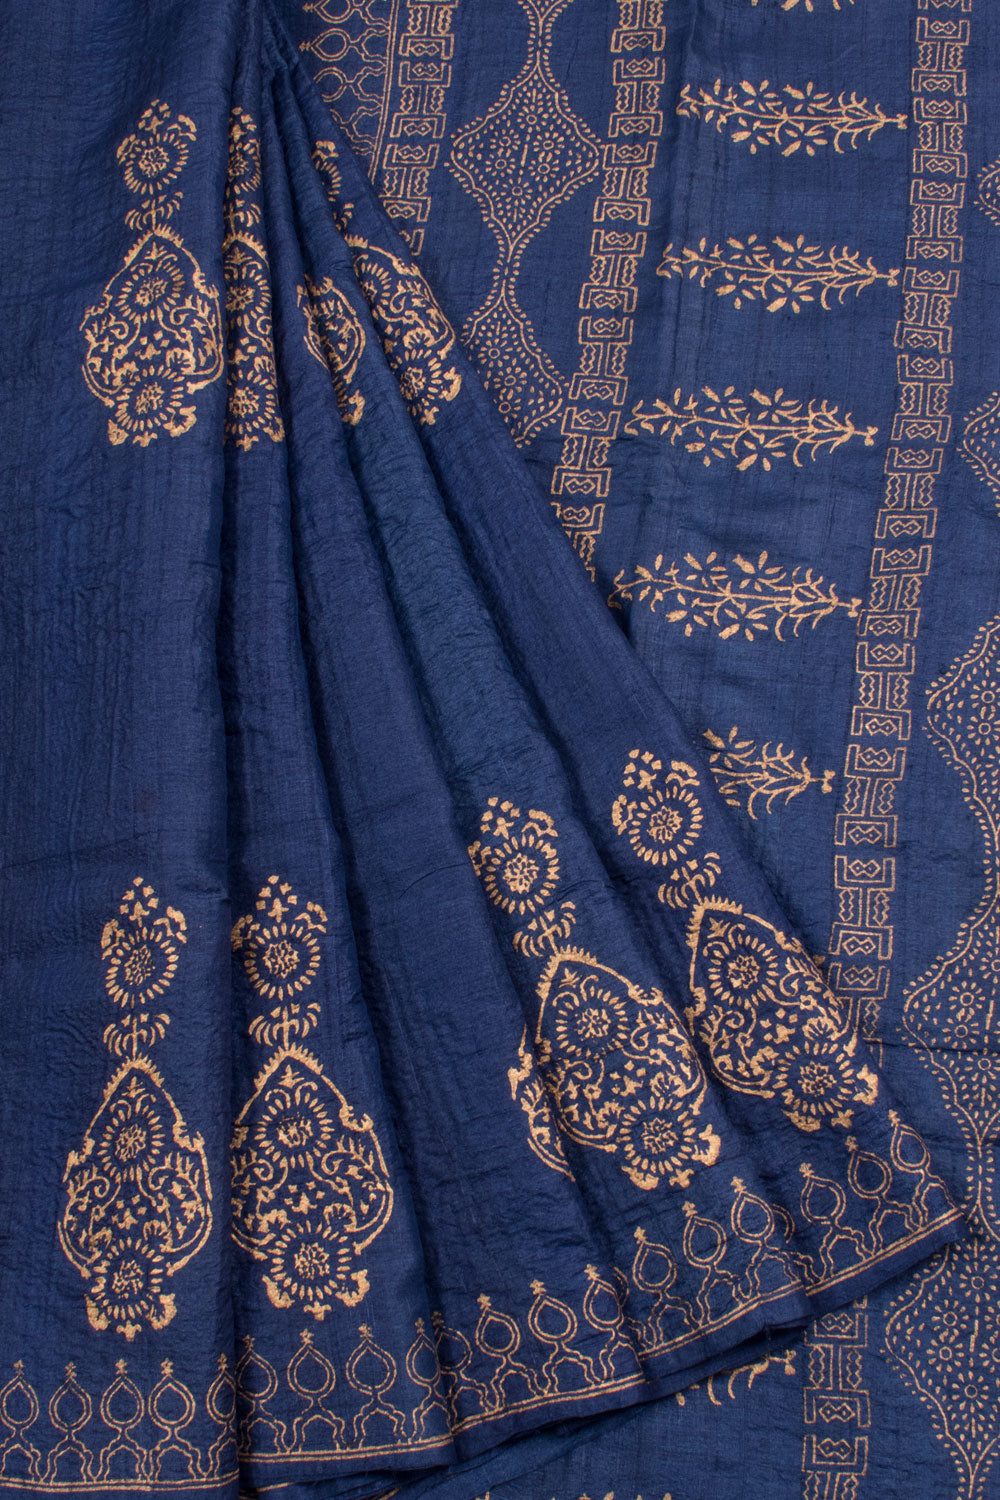 Hand Block Printed Tussar Silk Saree with Mughal Design and Fancy Tassels